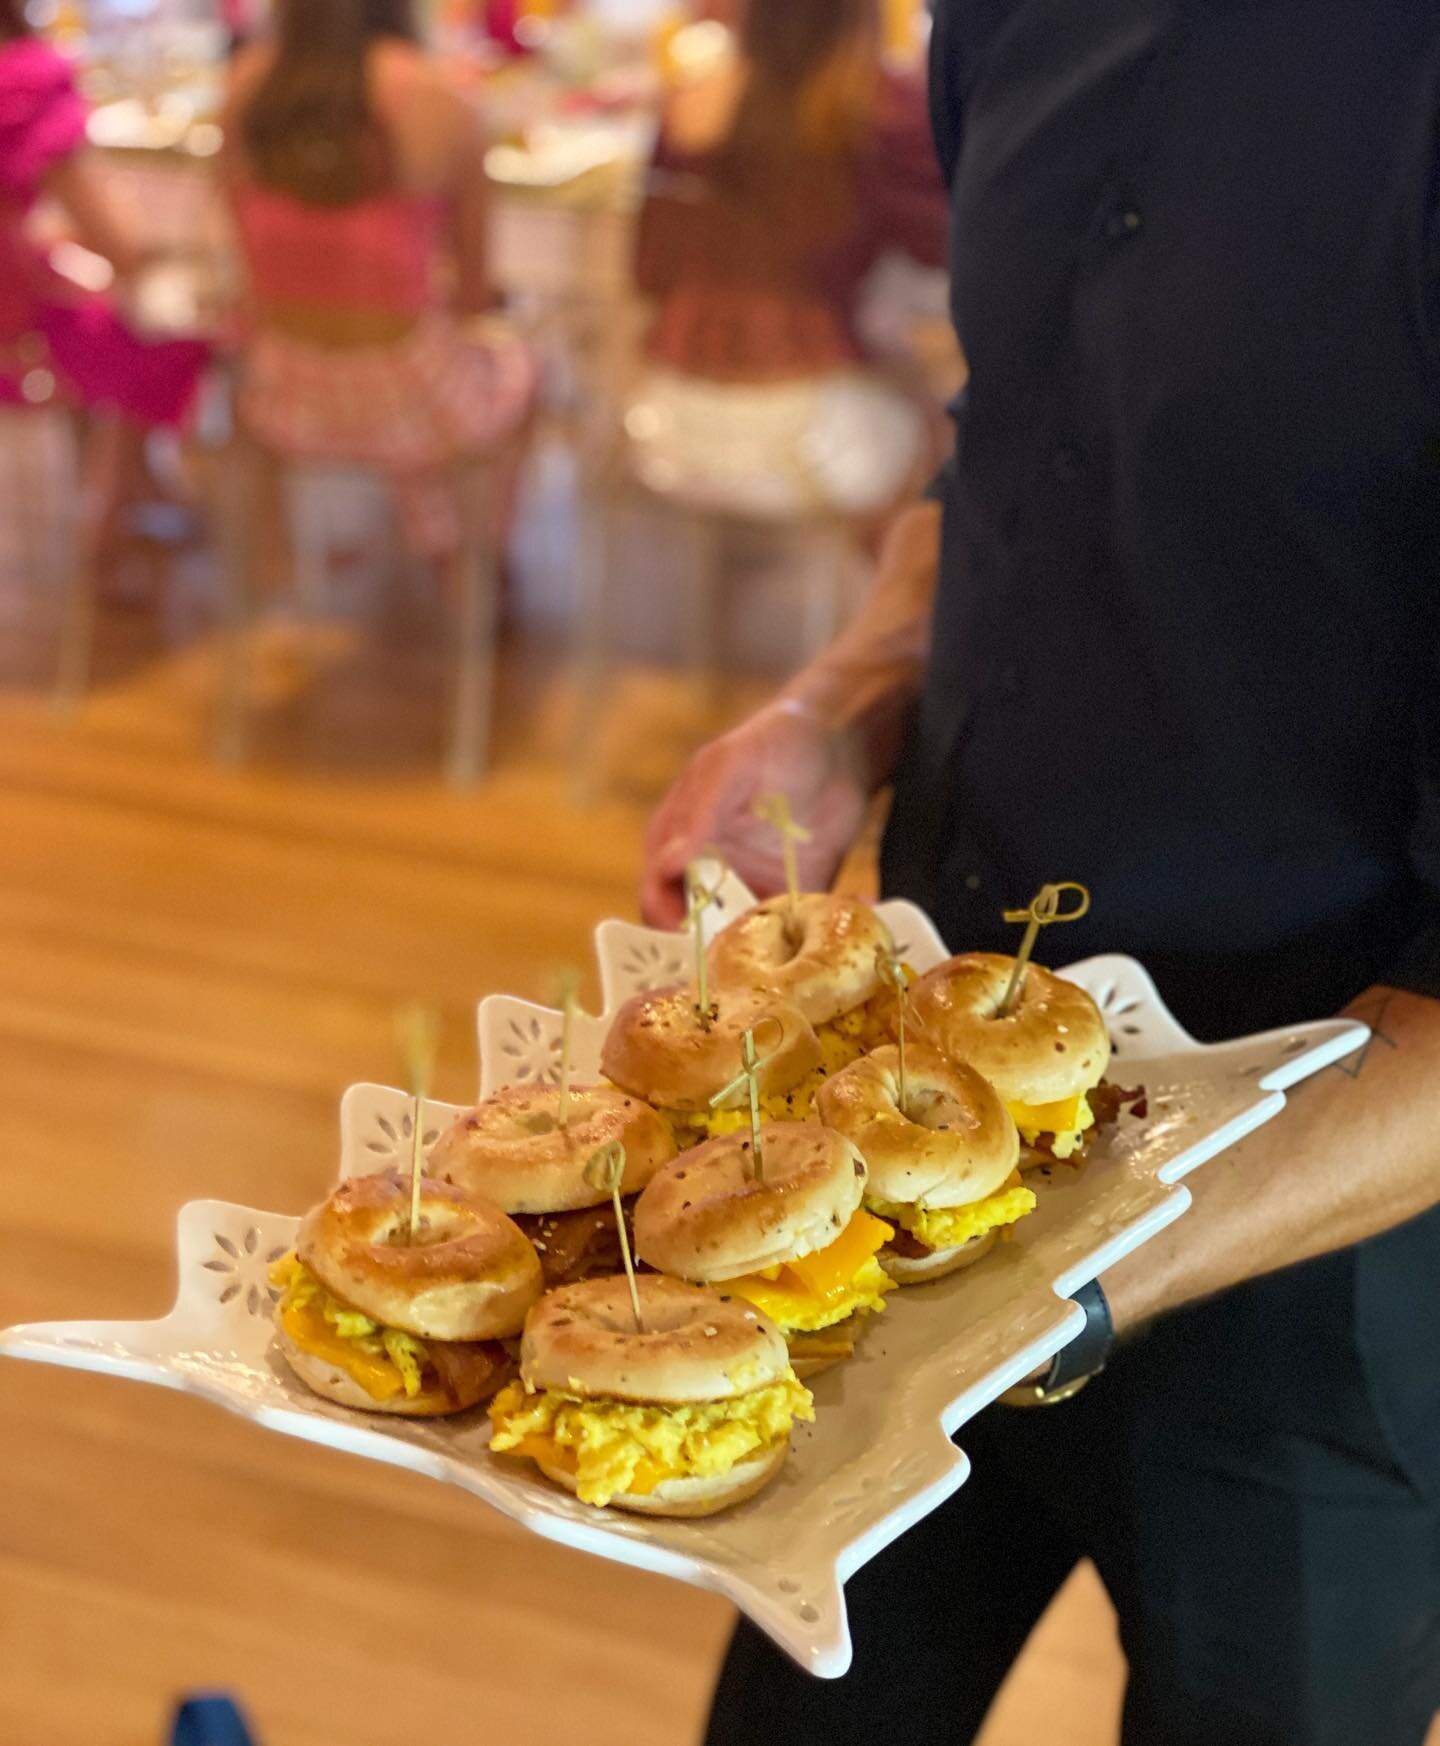 Mini NYC style &ldquo;BEC&rdquo; sliders for a themed brunch this past Sunday for clients. Thick hickory smoked bacon, farm fresh eggs, Vermont cheddar, mini fresh bagels and hot sauce on the side. 🥯 

#nyc #bec #brunch #bagel #yummy #foodporn #even